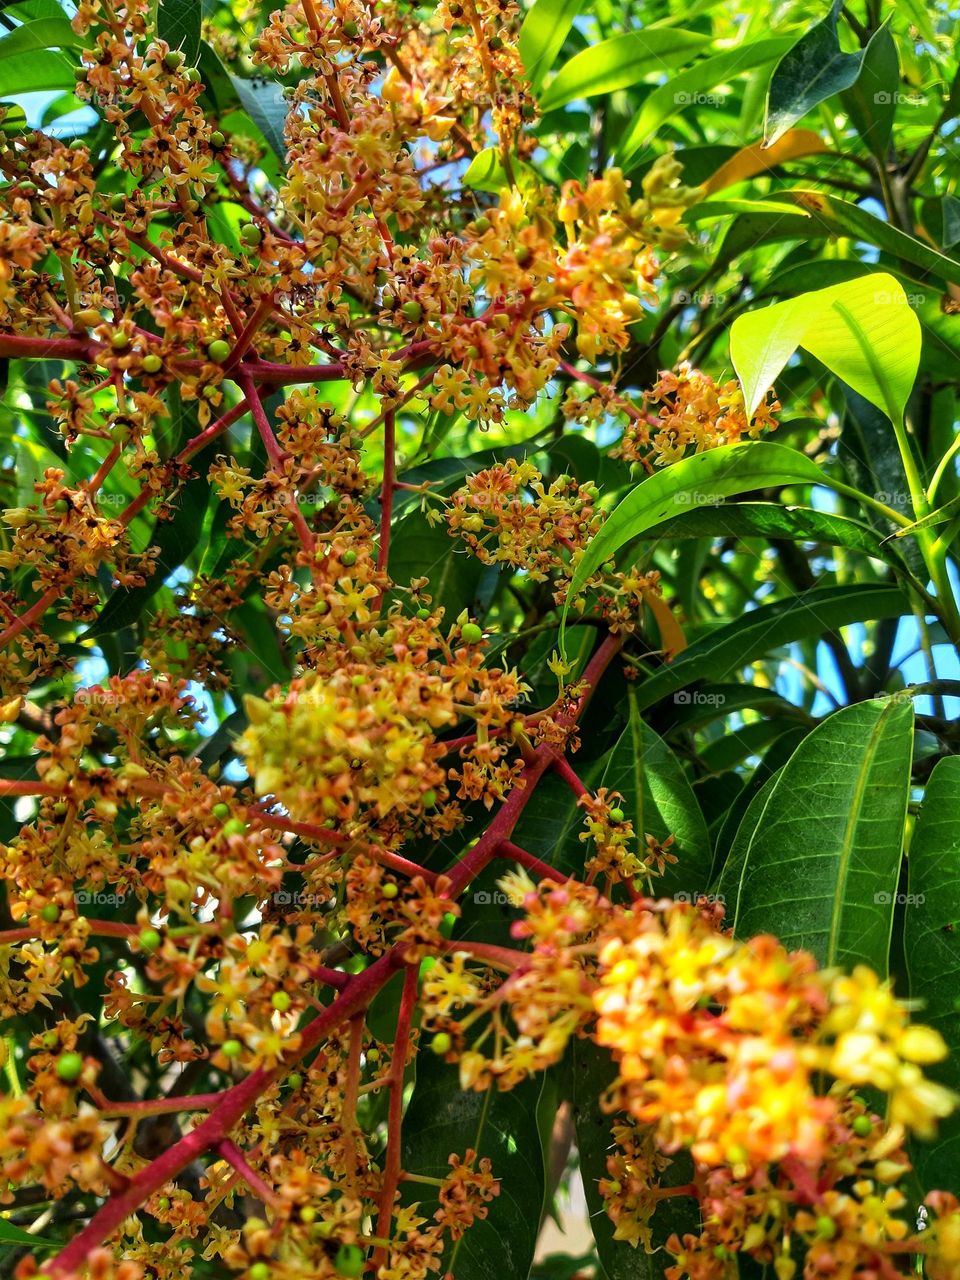 This is the color of flower of mango tree in tropical country like Indonesia. Mango tree has a scientific name called Mangifera indica. Its fruit has a sweet taste and commonly sold in market.